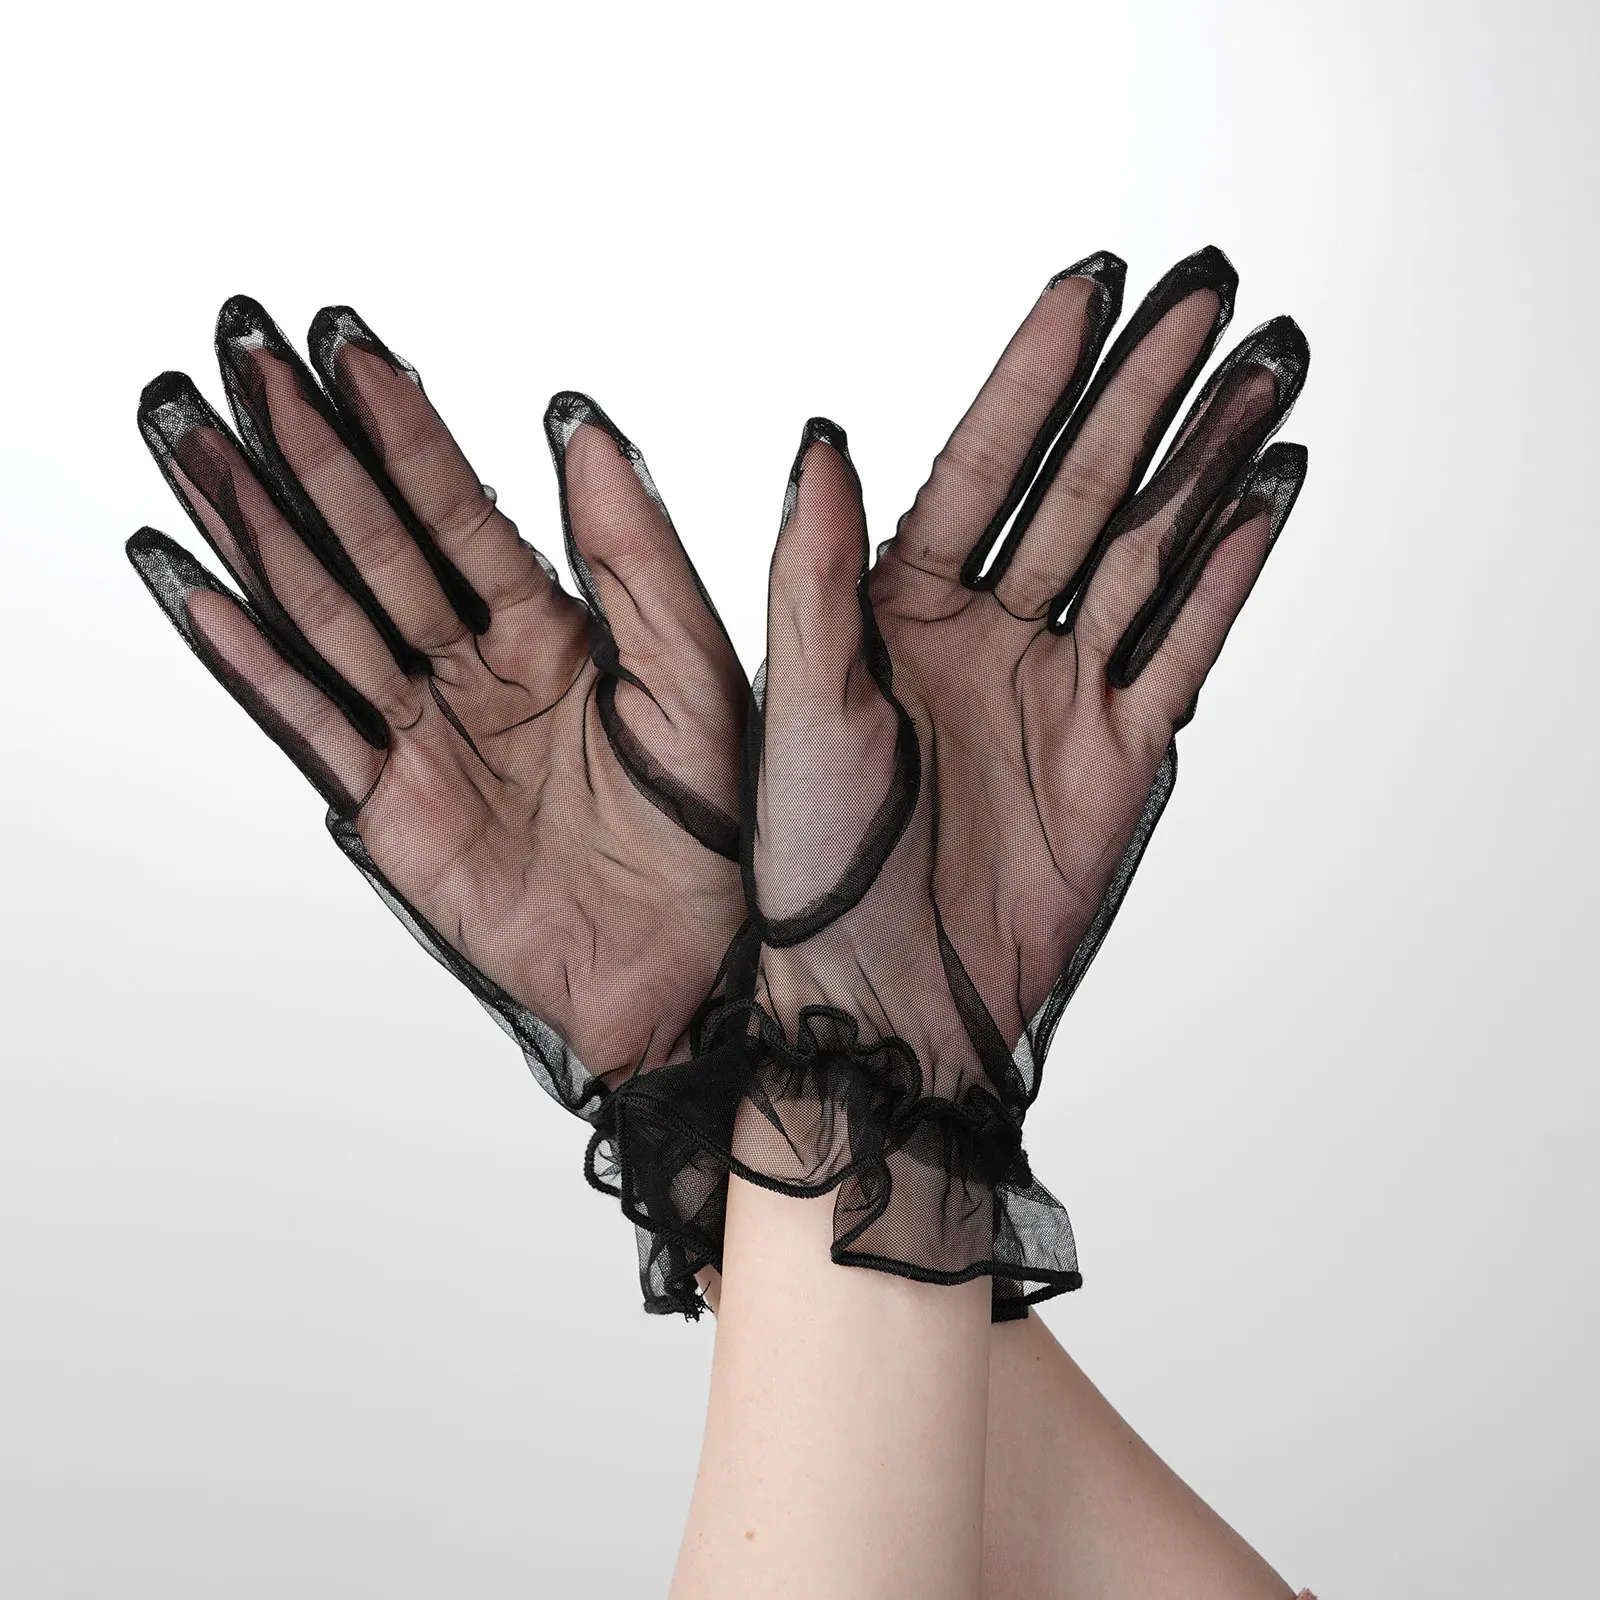 

Lotus Leaf Short Etiquette Gloves Women Cocktail Party Dance Mittens Sexy Sheer Tulle Mesh Bride Glove Full Finger Wedding Mitts